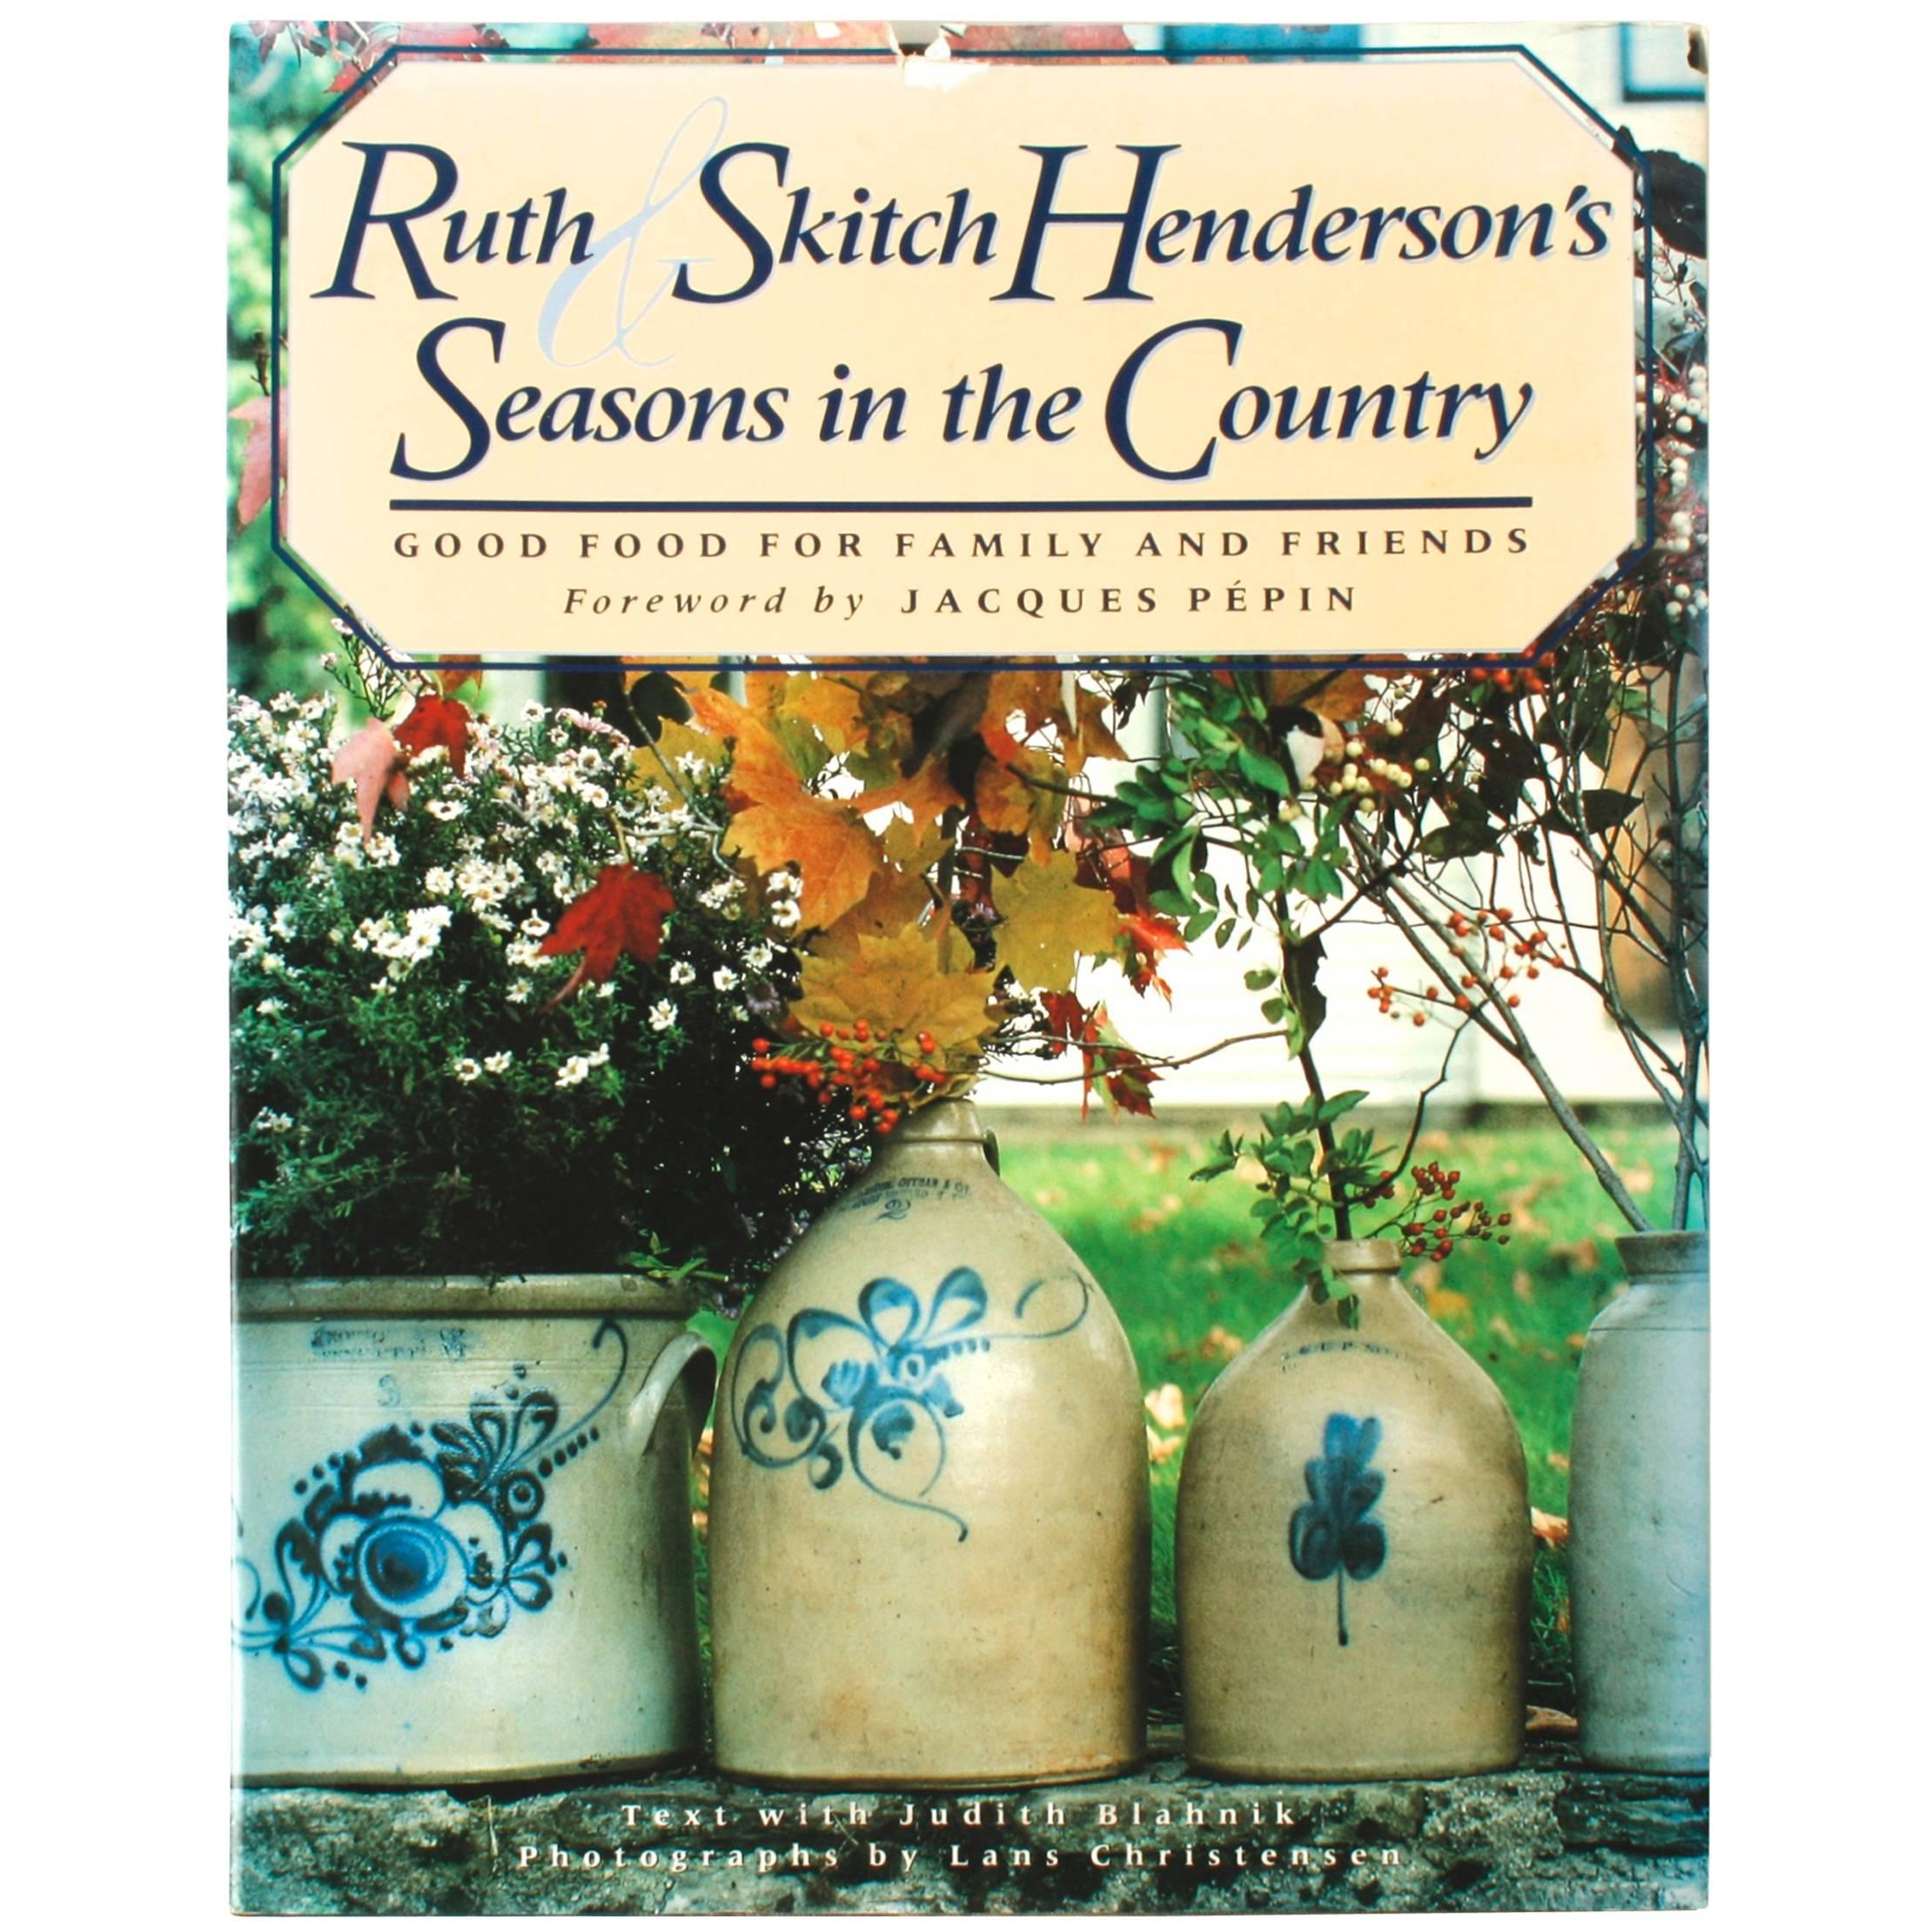 Ruth & Skitch Henderson's Seasons in the Country, première édition signée